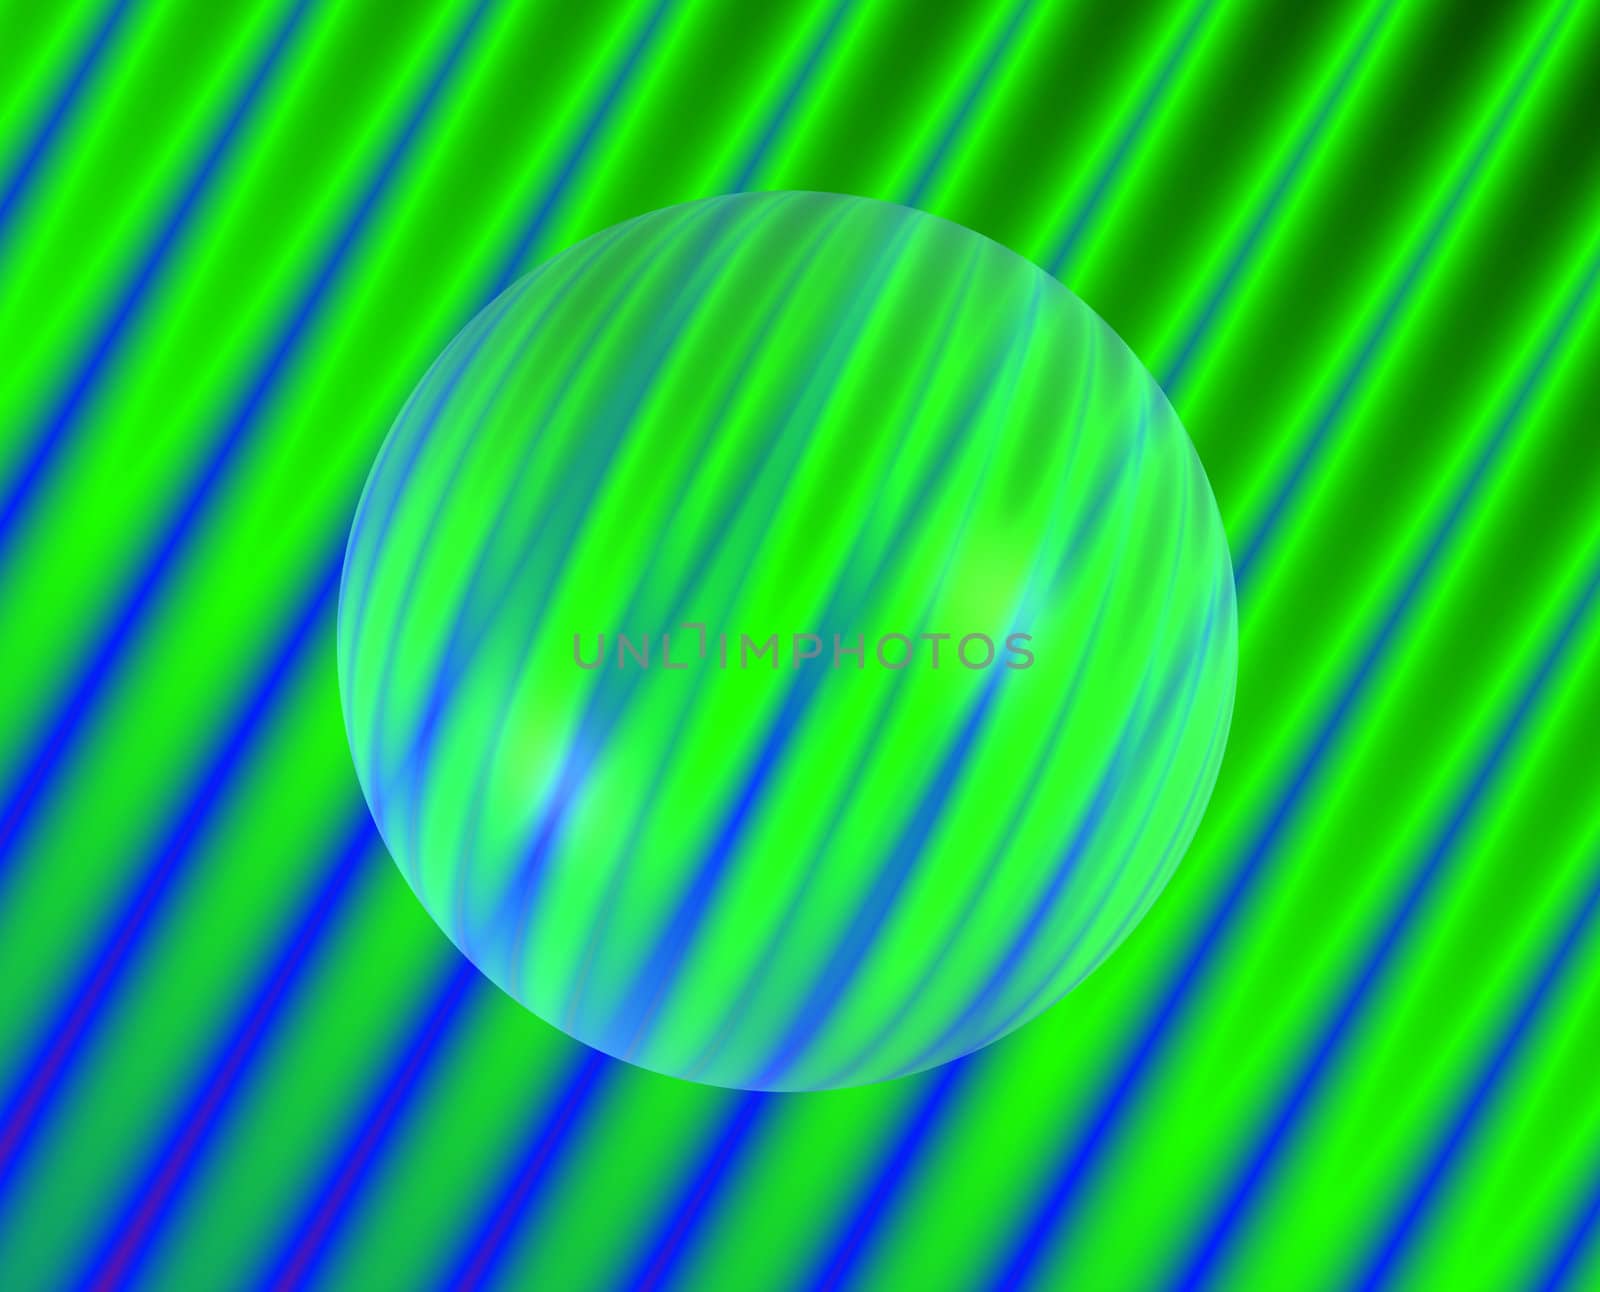 Sphere on green and blue screen